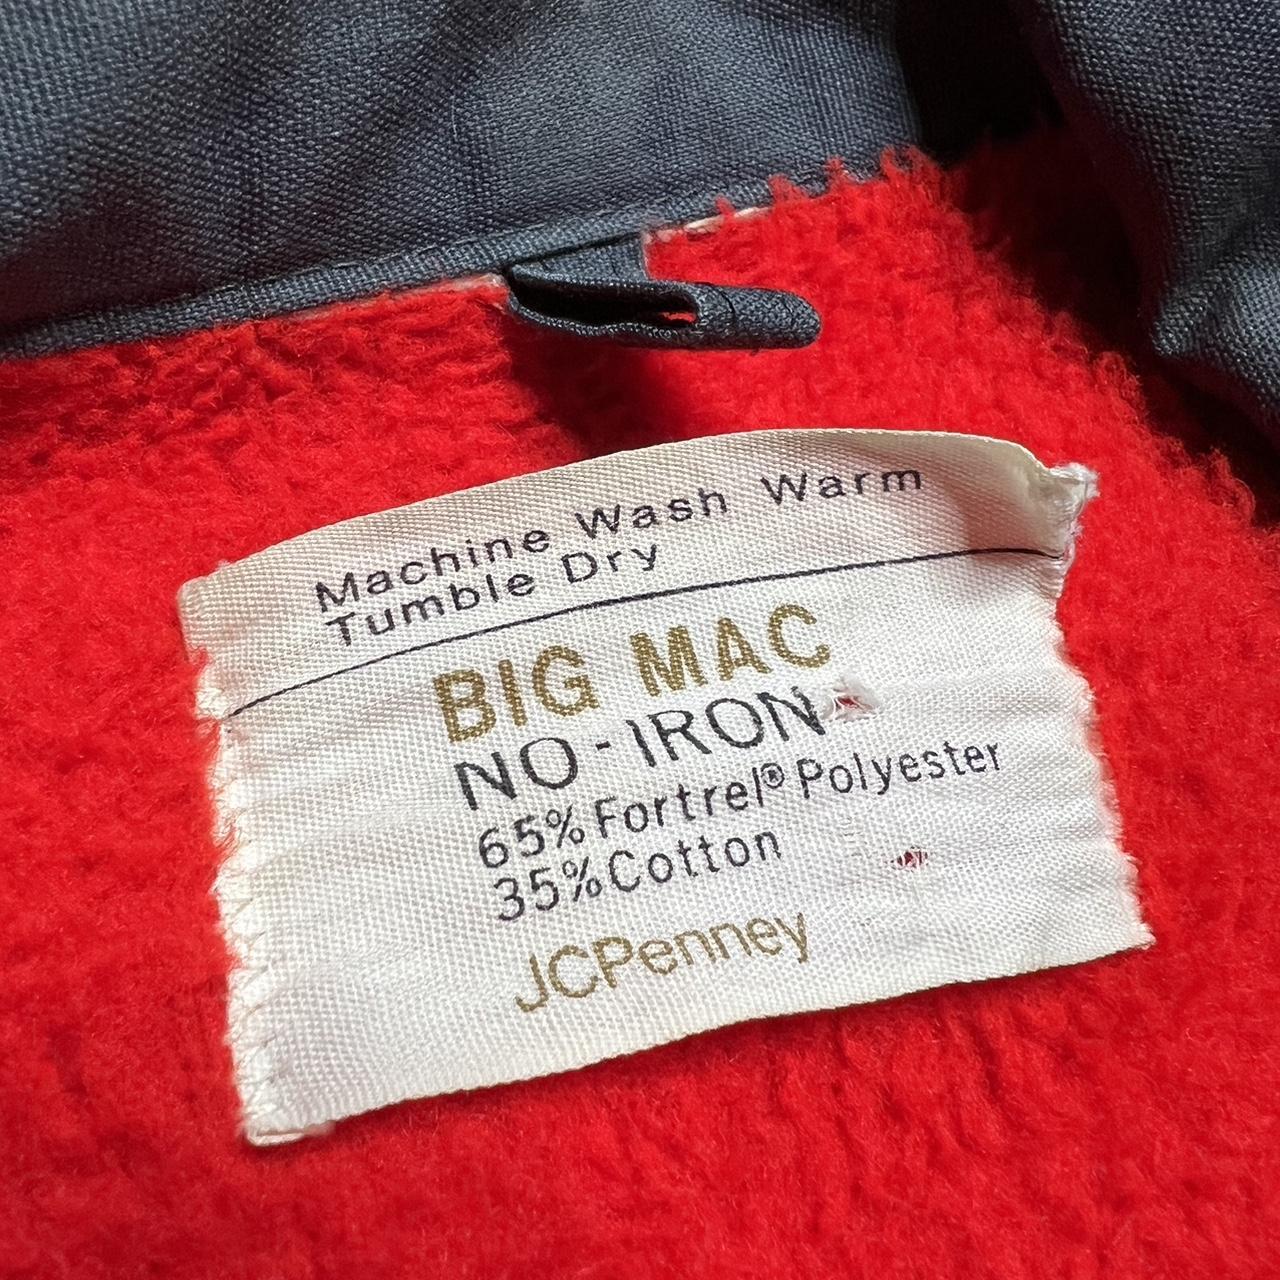 This vintage JCPenney Big Mac jacket from the 1960s